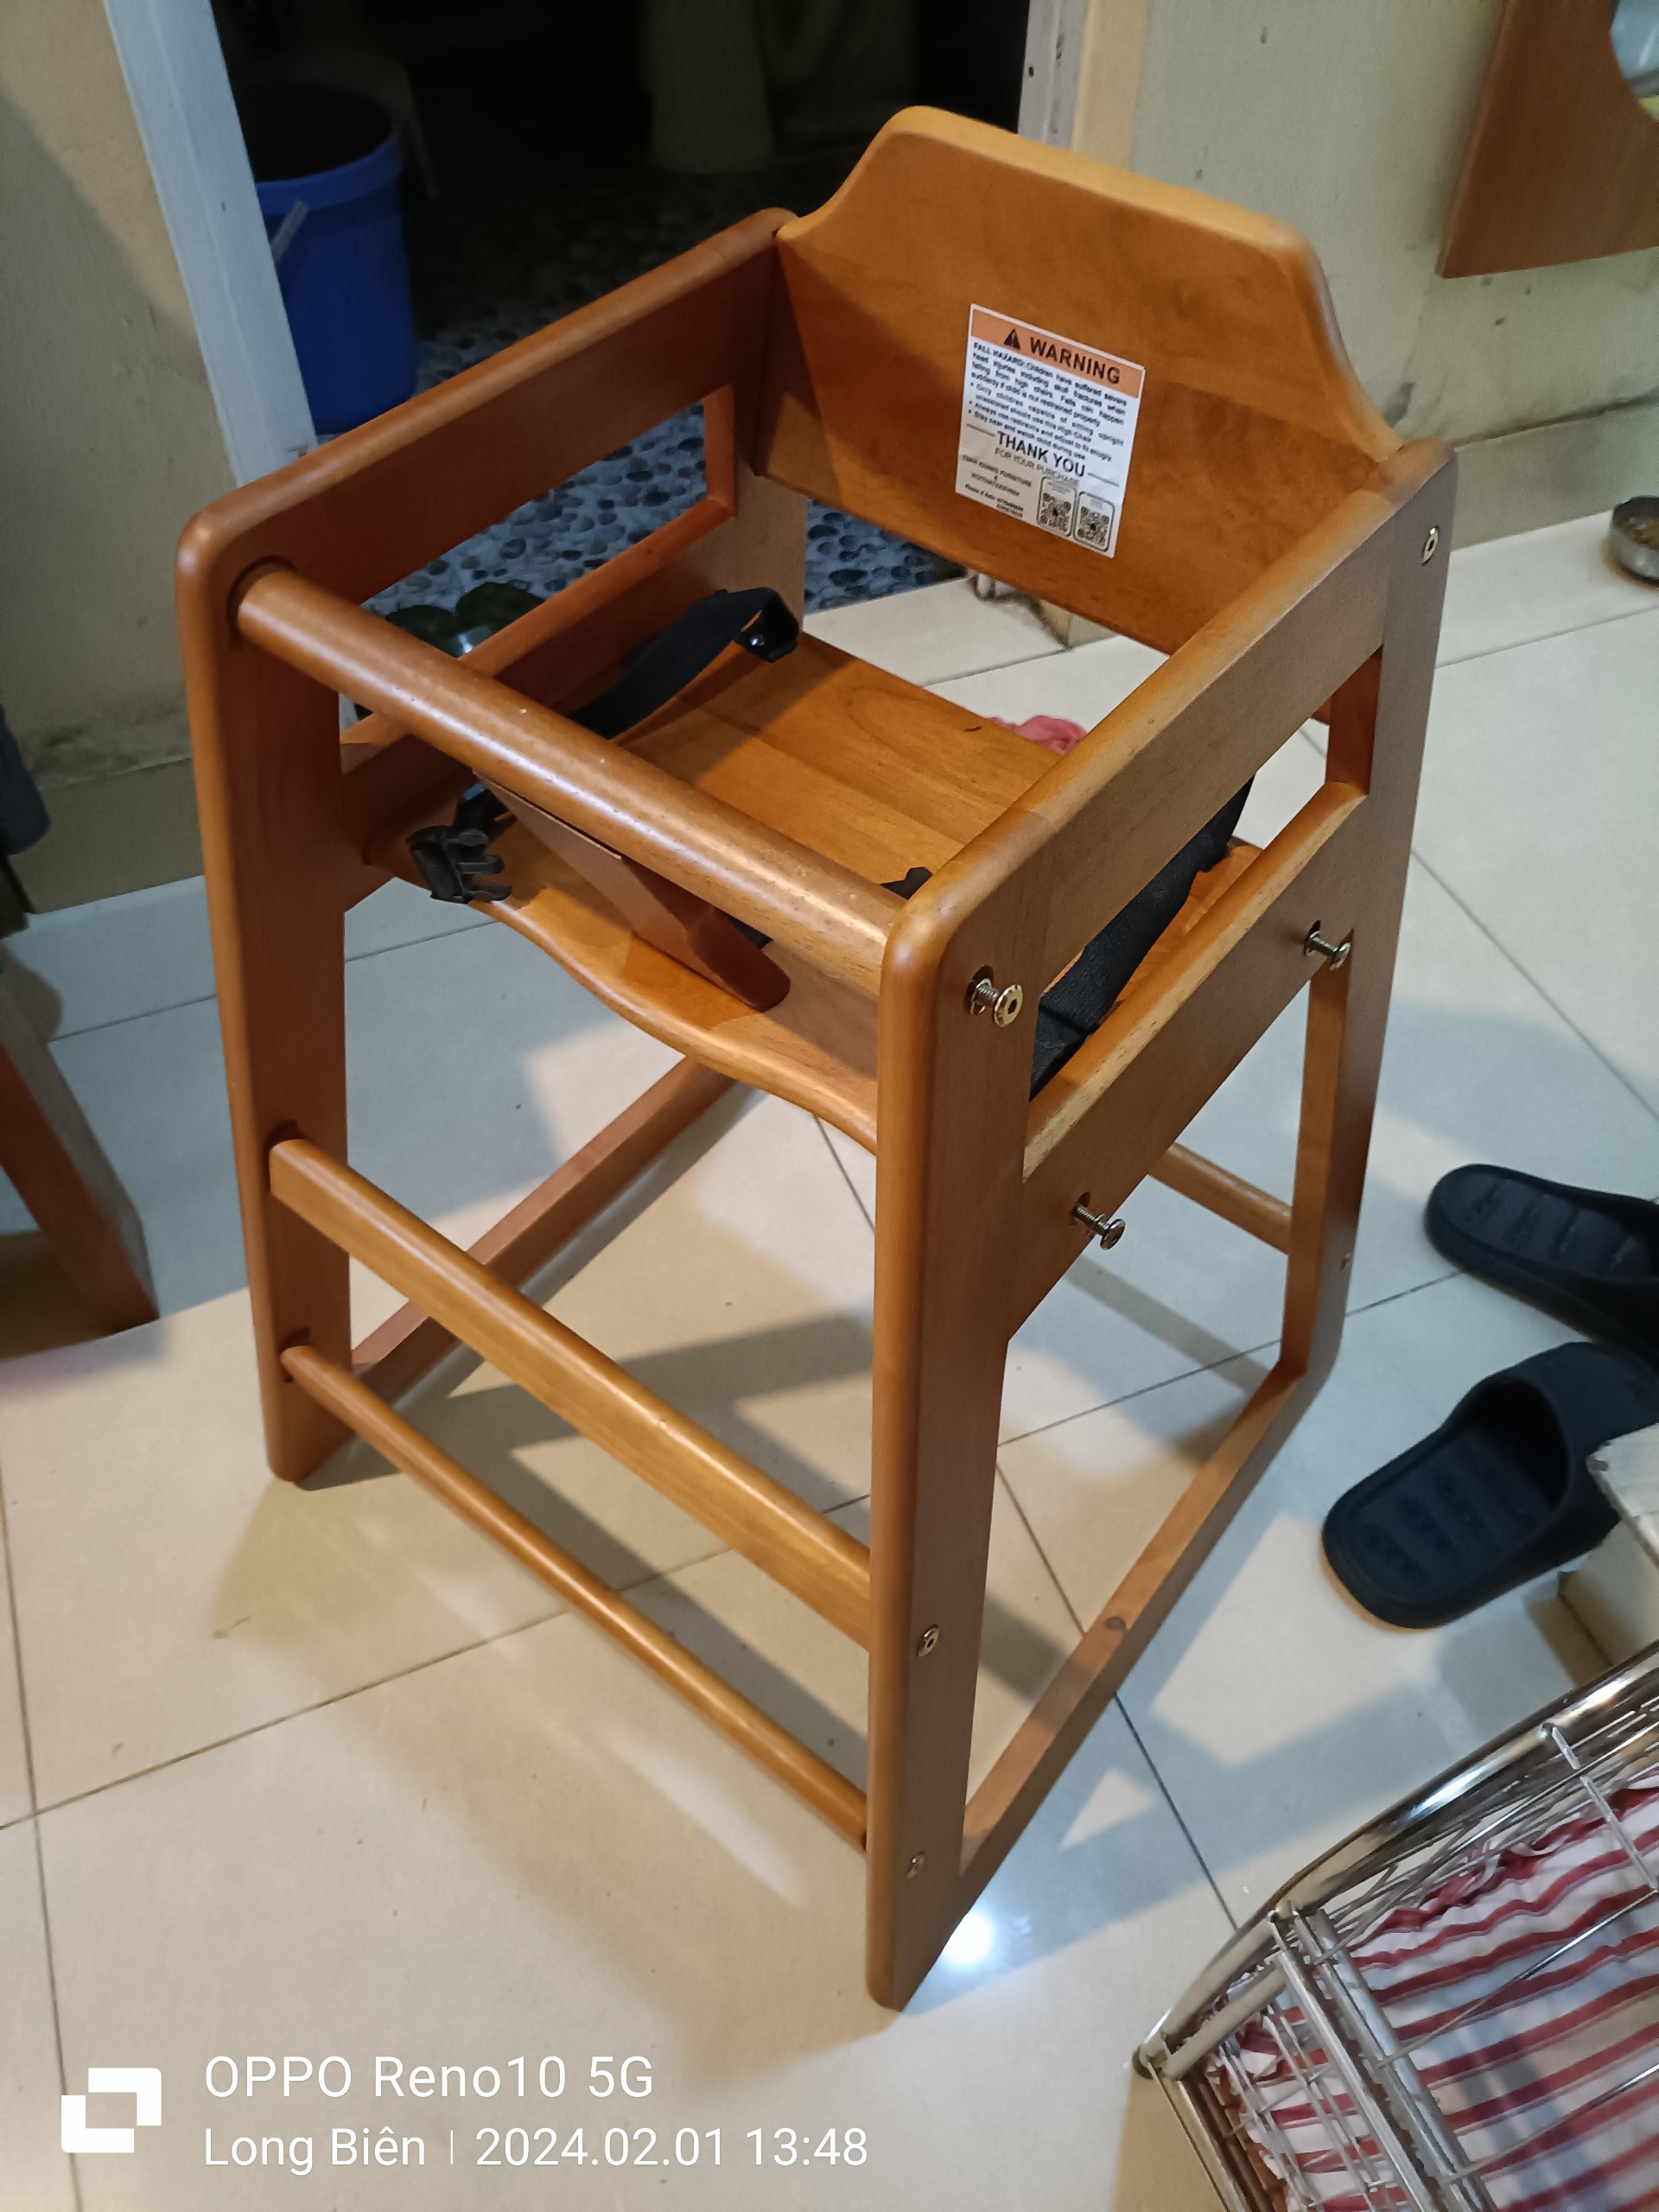 Rental of baby's high chair